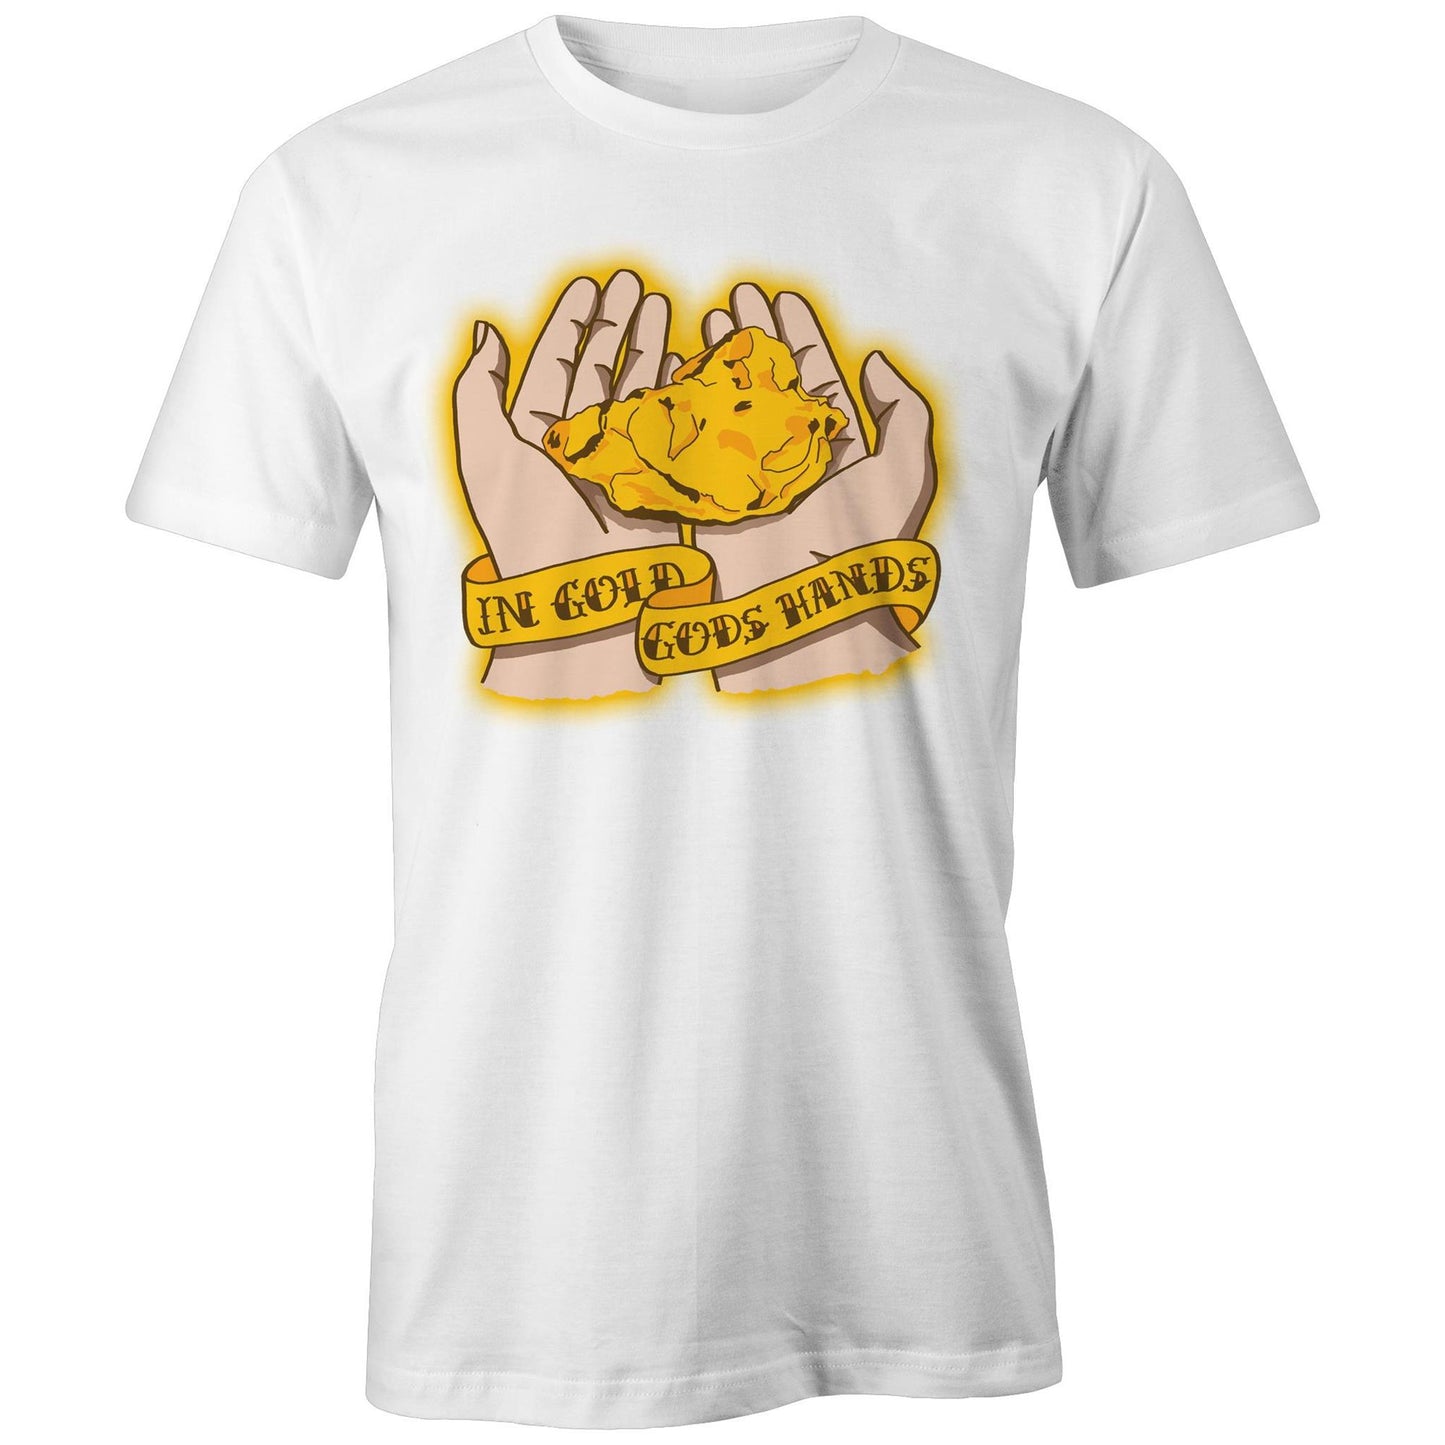 In Gold Gods Hands (AS Colour - Classic Tee)